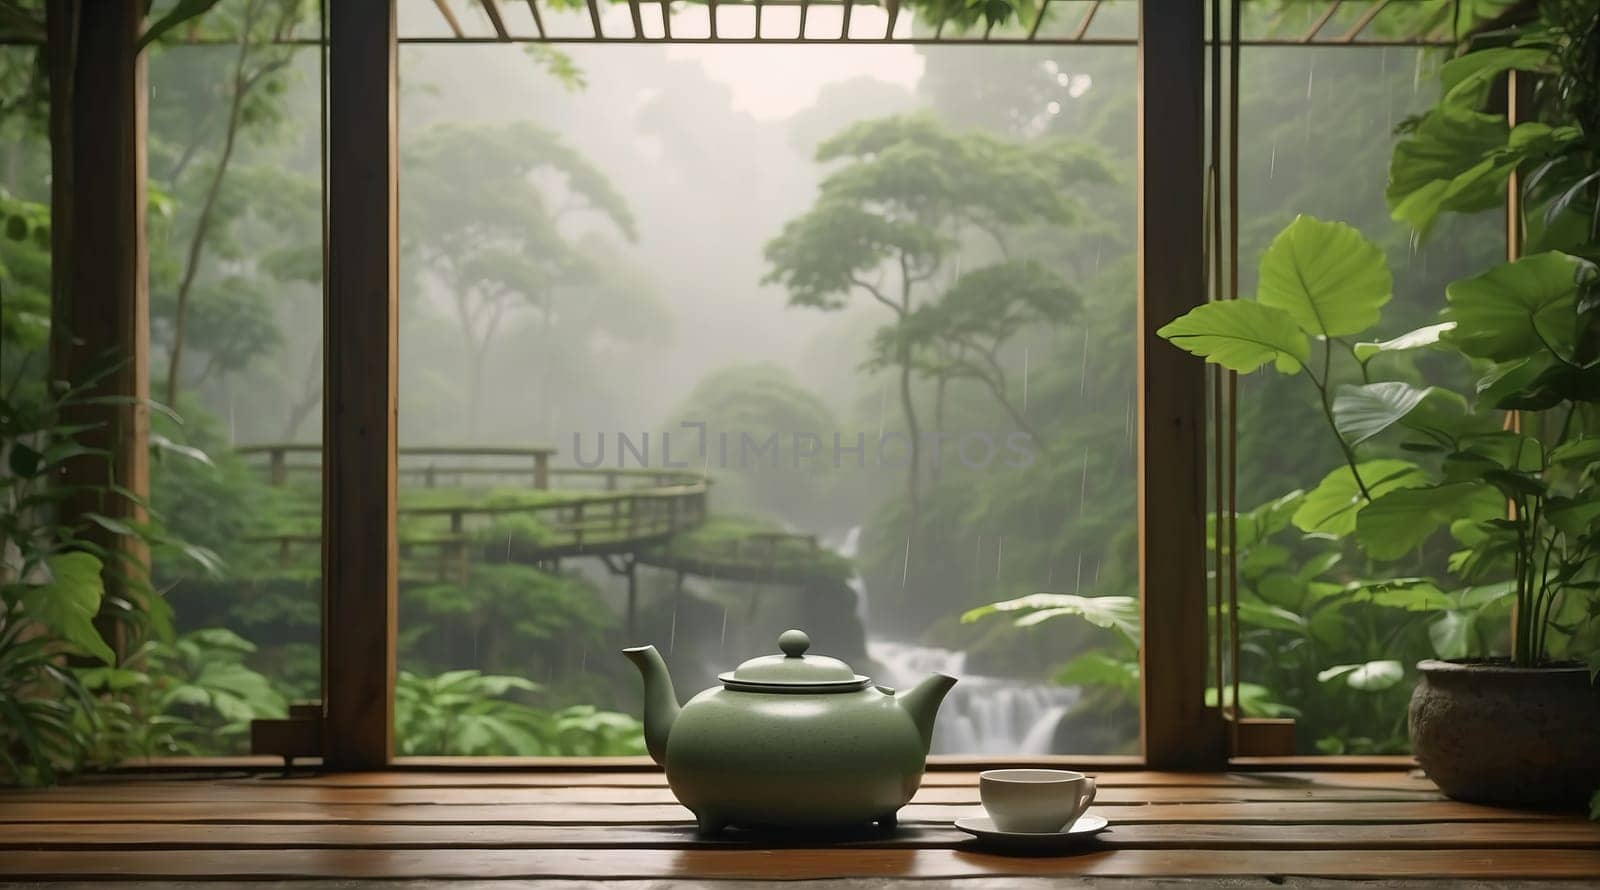 Tea drinking in the tropics by applesstock